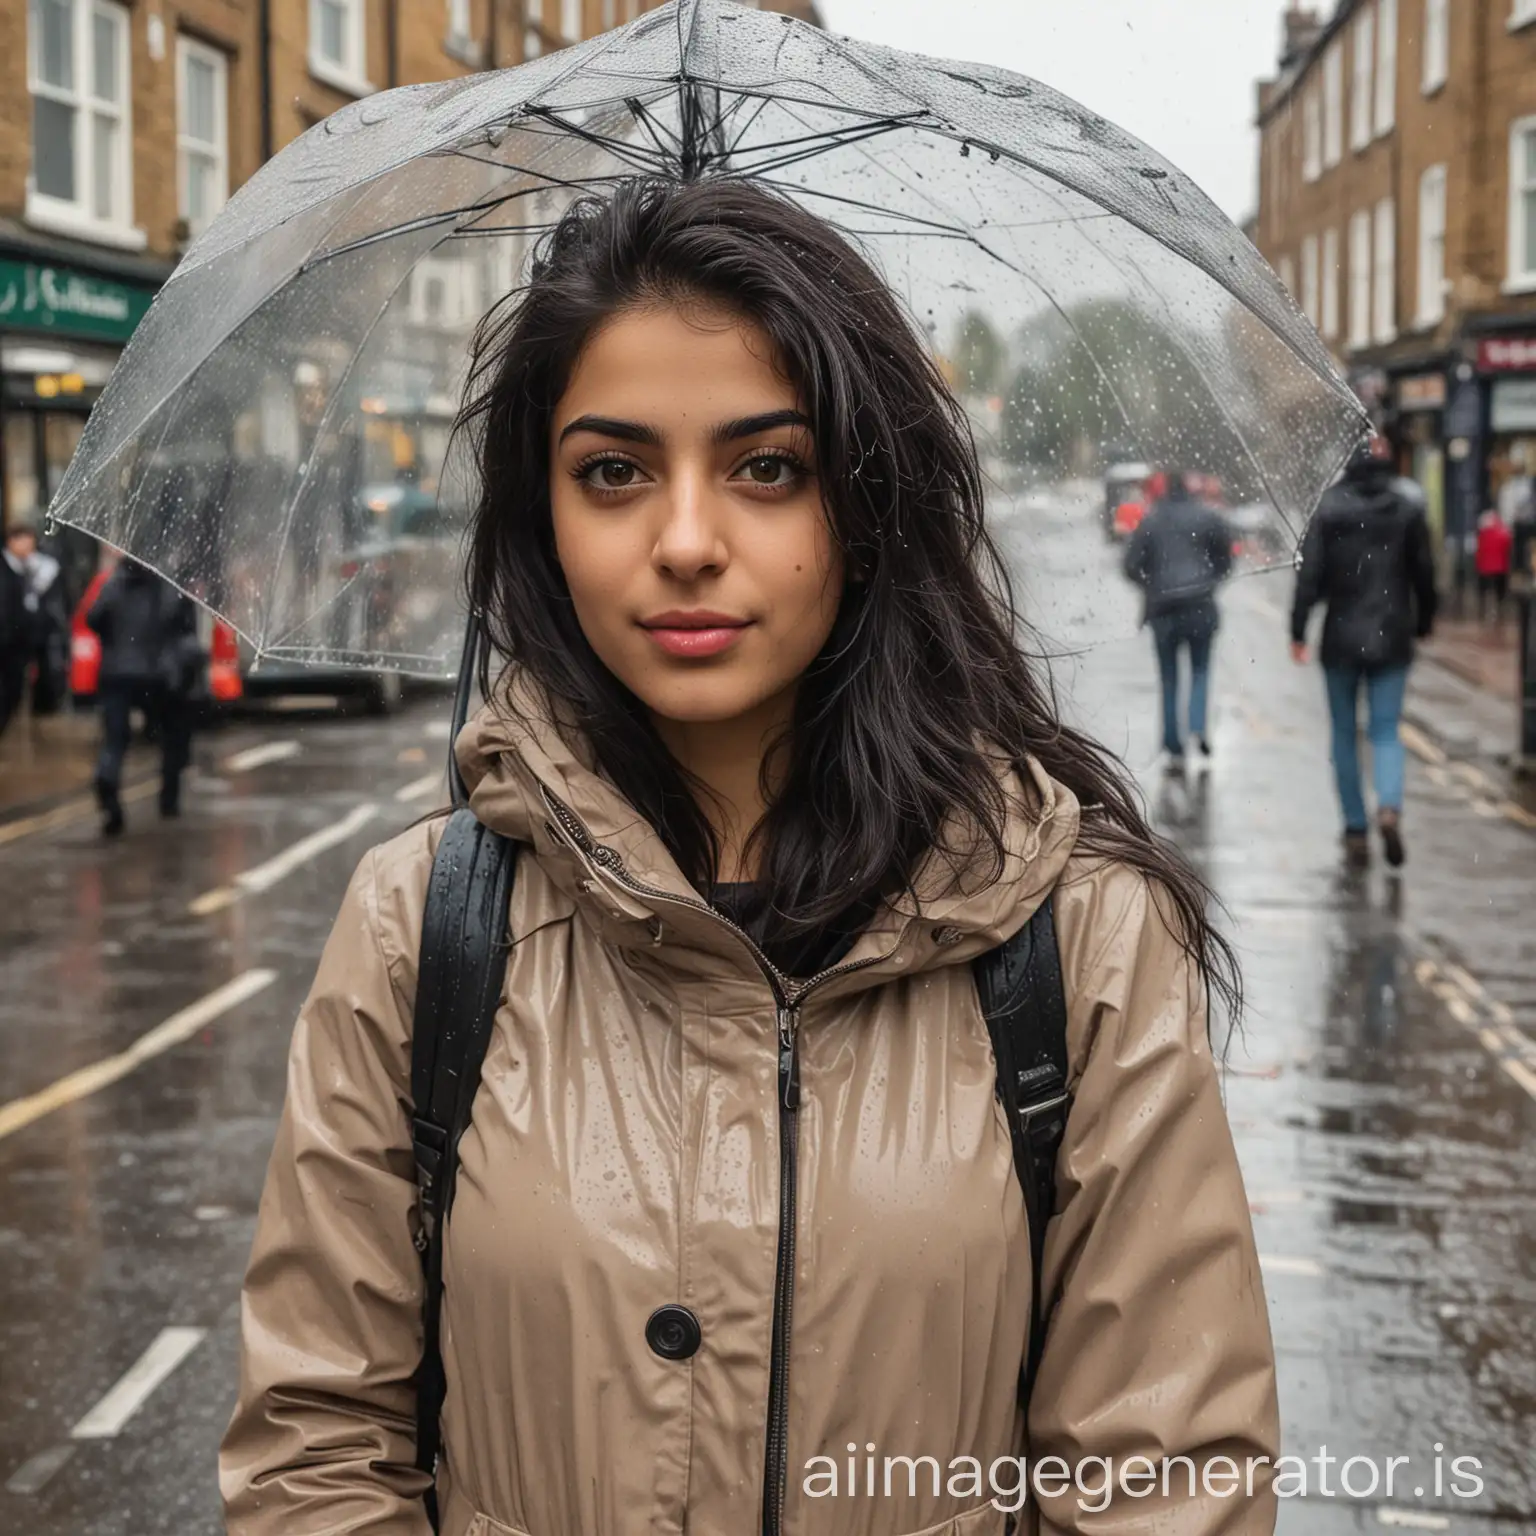 Elaheh is a persian girl. She is in England. She is walking in the street in a rainy day 